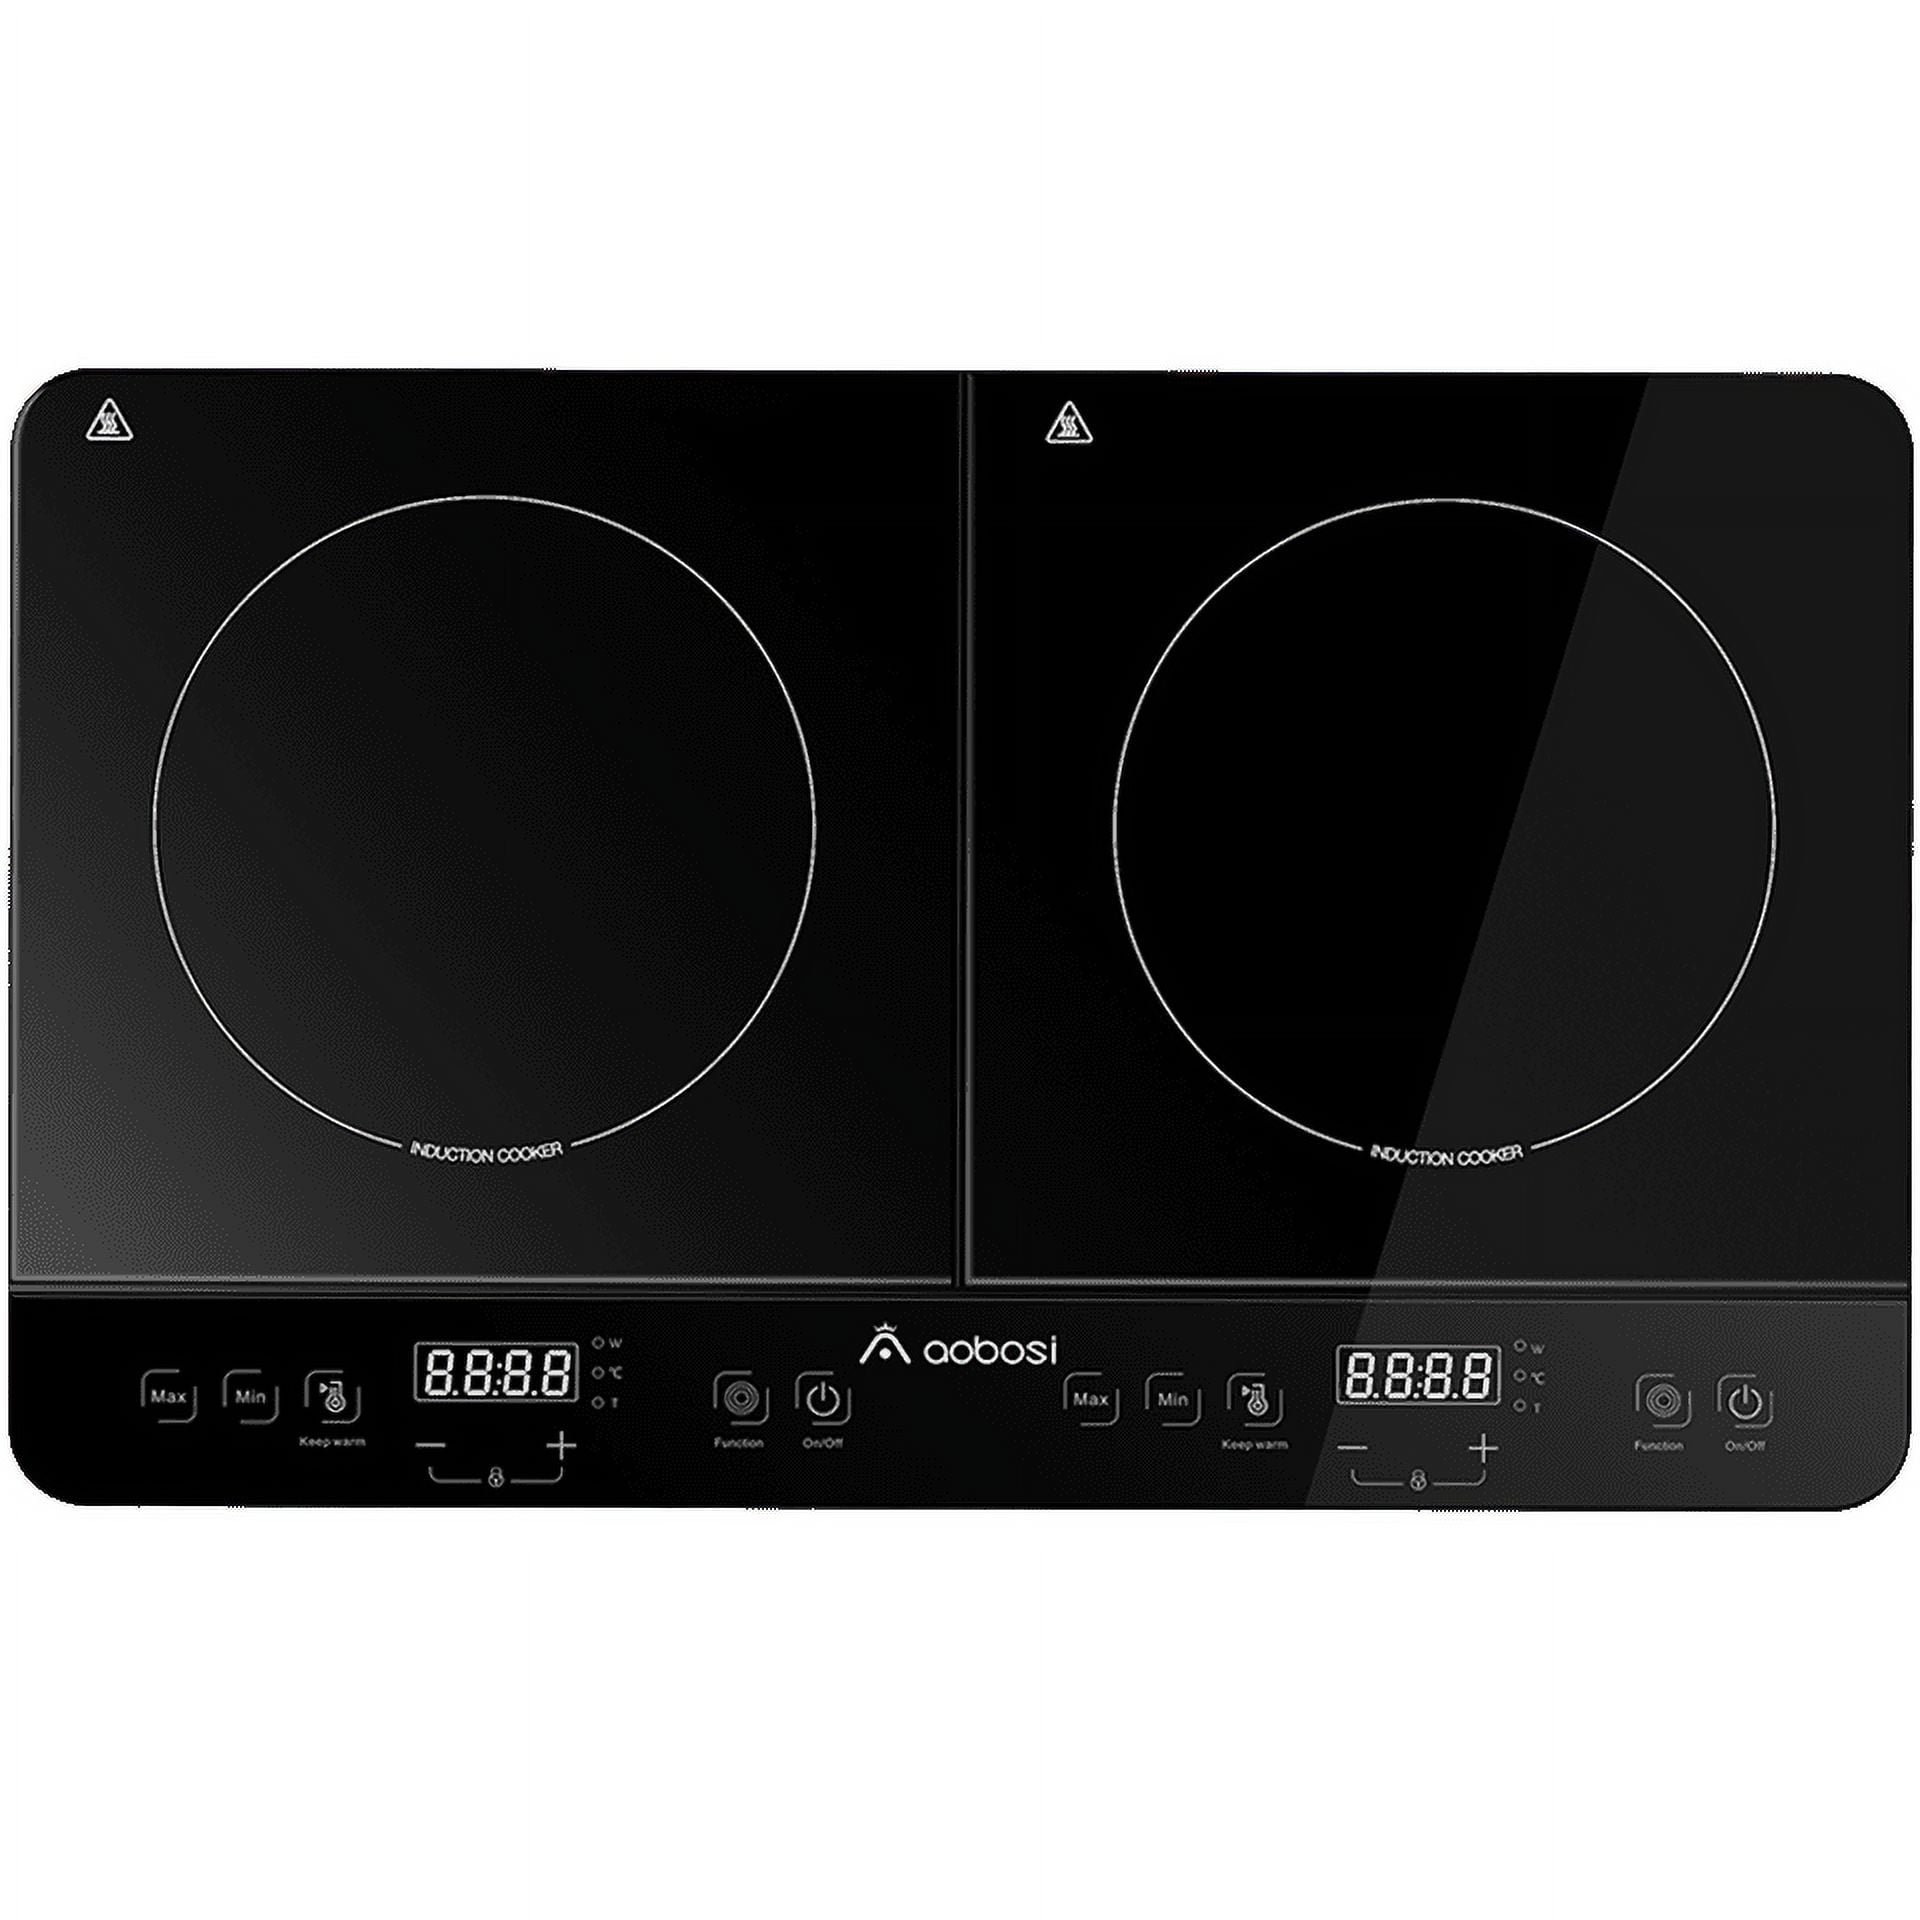 Aobosi Double Induction Cooktop,Portable Induction Cooker with 2 Burner  Independent Control,Ultrathin Body,10 Temperature,1800W-Multiple Power